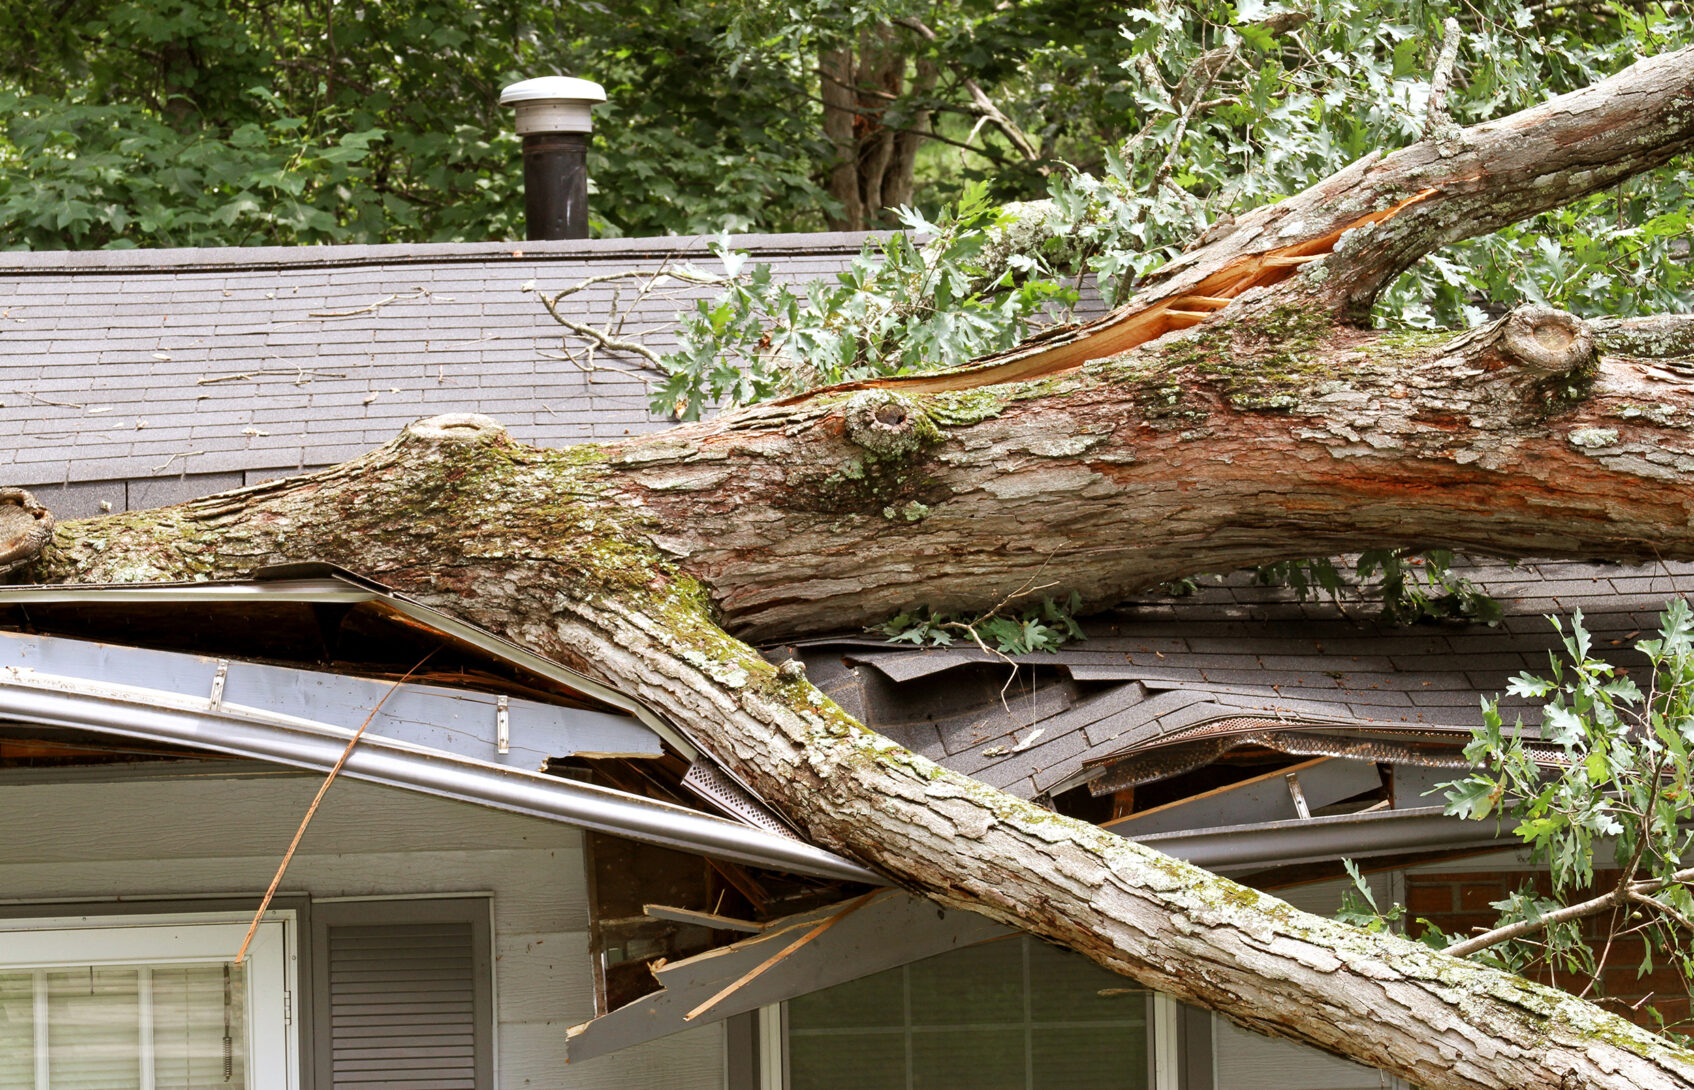 A tree that has fallen onto a house roof, causing significant damage.